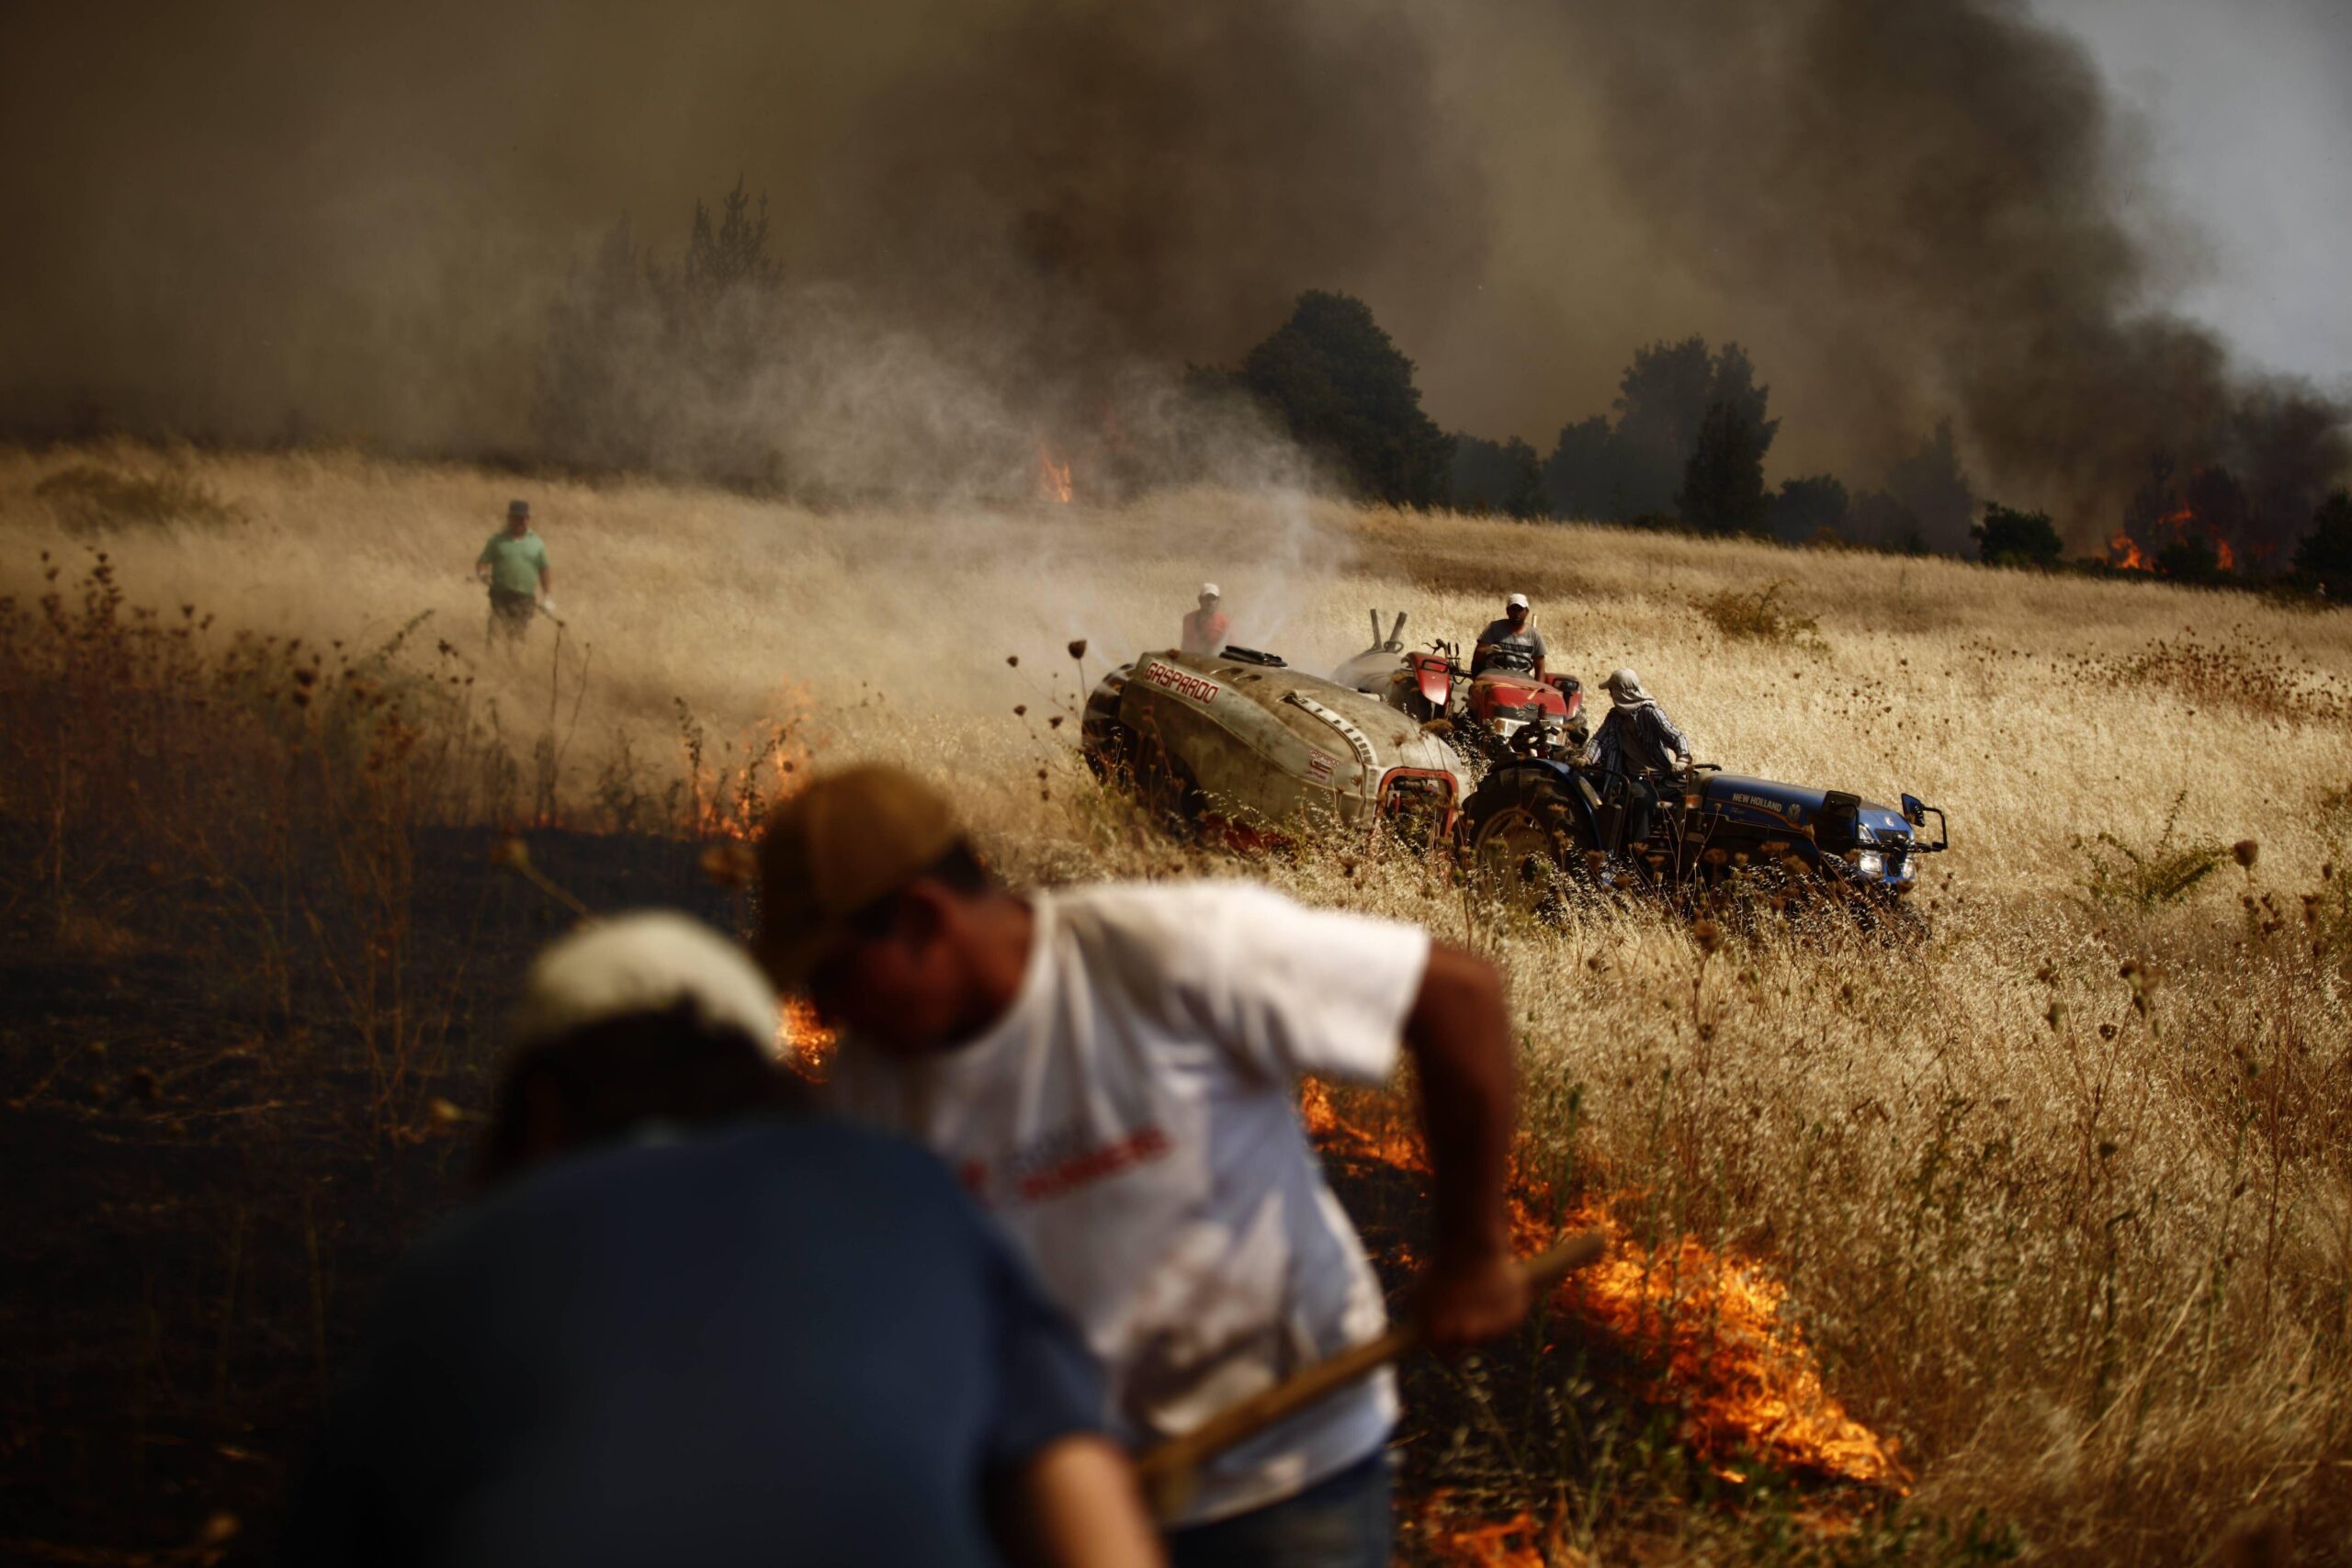 People walk through wildfires in Chile. There is smoke and flames over a wheat field. The sky is black and brown with thick smoke. 